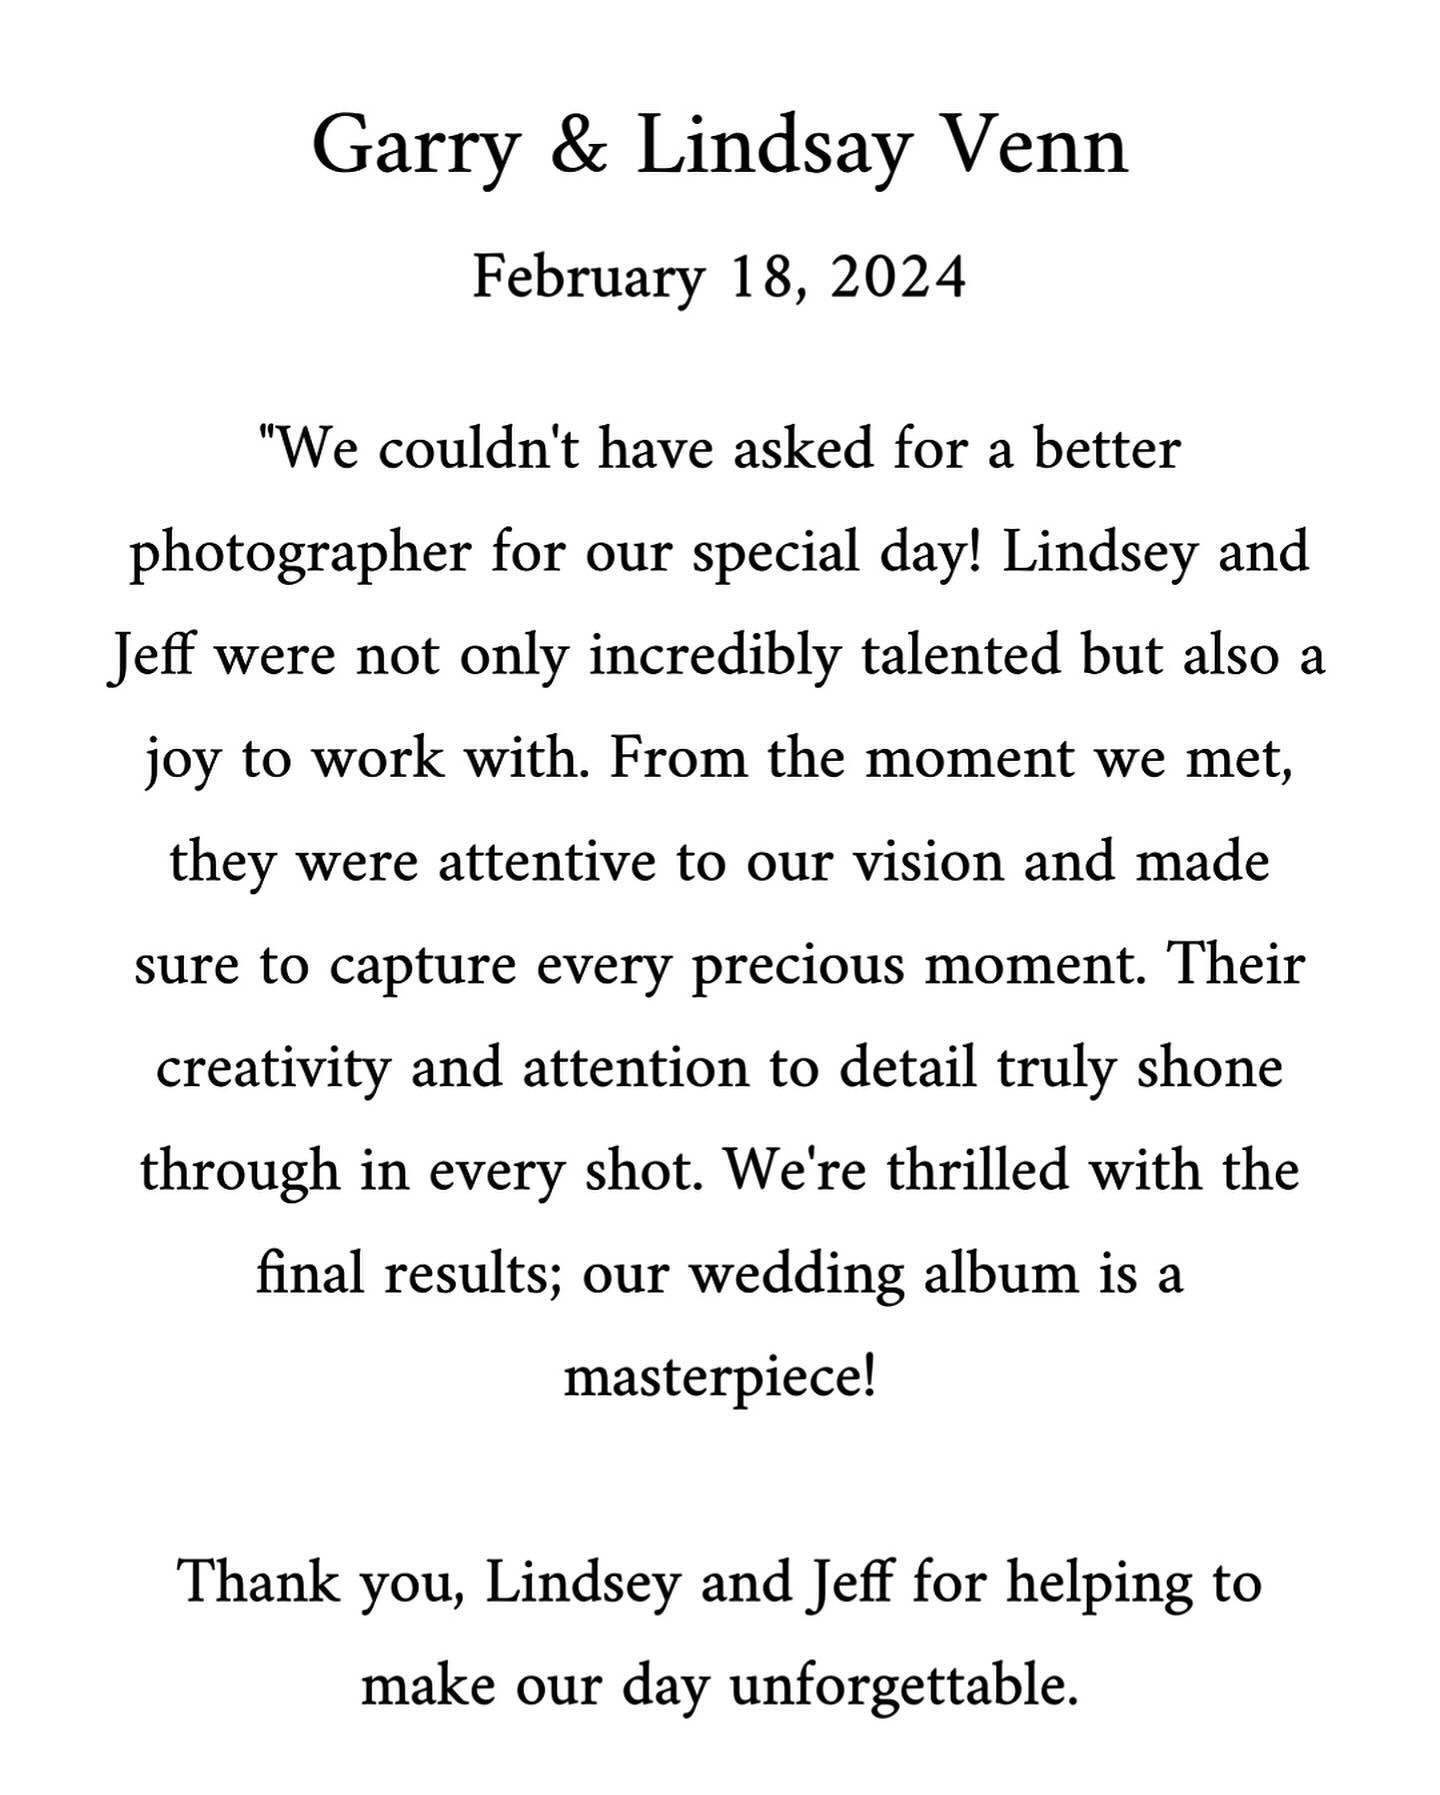 Thanks so much to Lindsay and Garry for such kind words and for trusting us with your wedding day. @tighnamara #weddingdaydetails #westcoastweddingphotographer #westcoastweddings #vancouverislandweddings #victoriabcphotographer #canadianweddingphotog